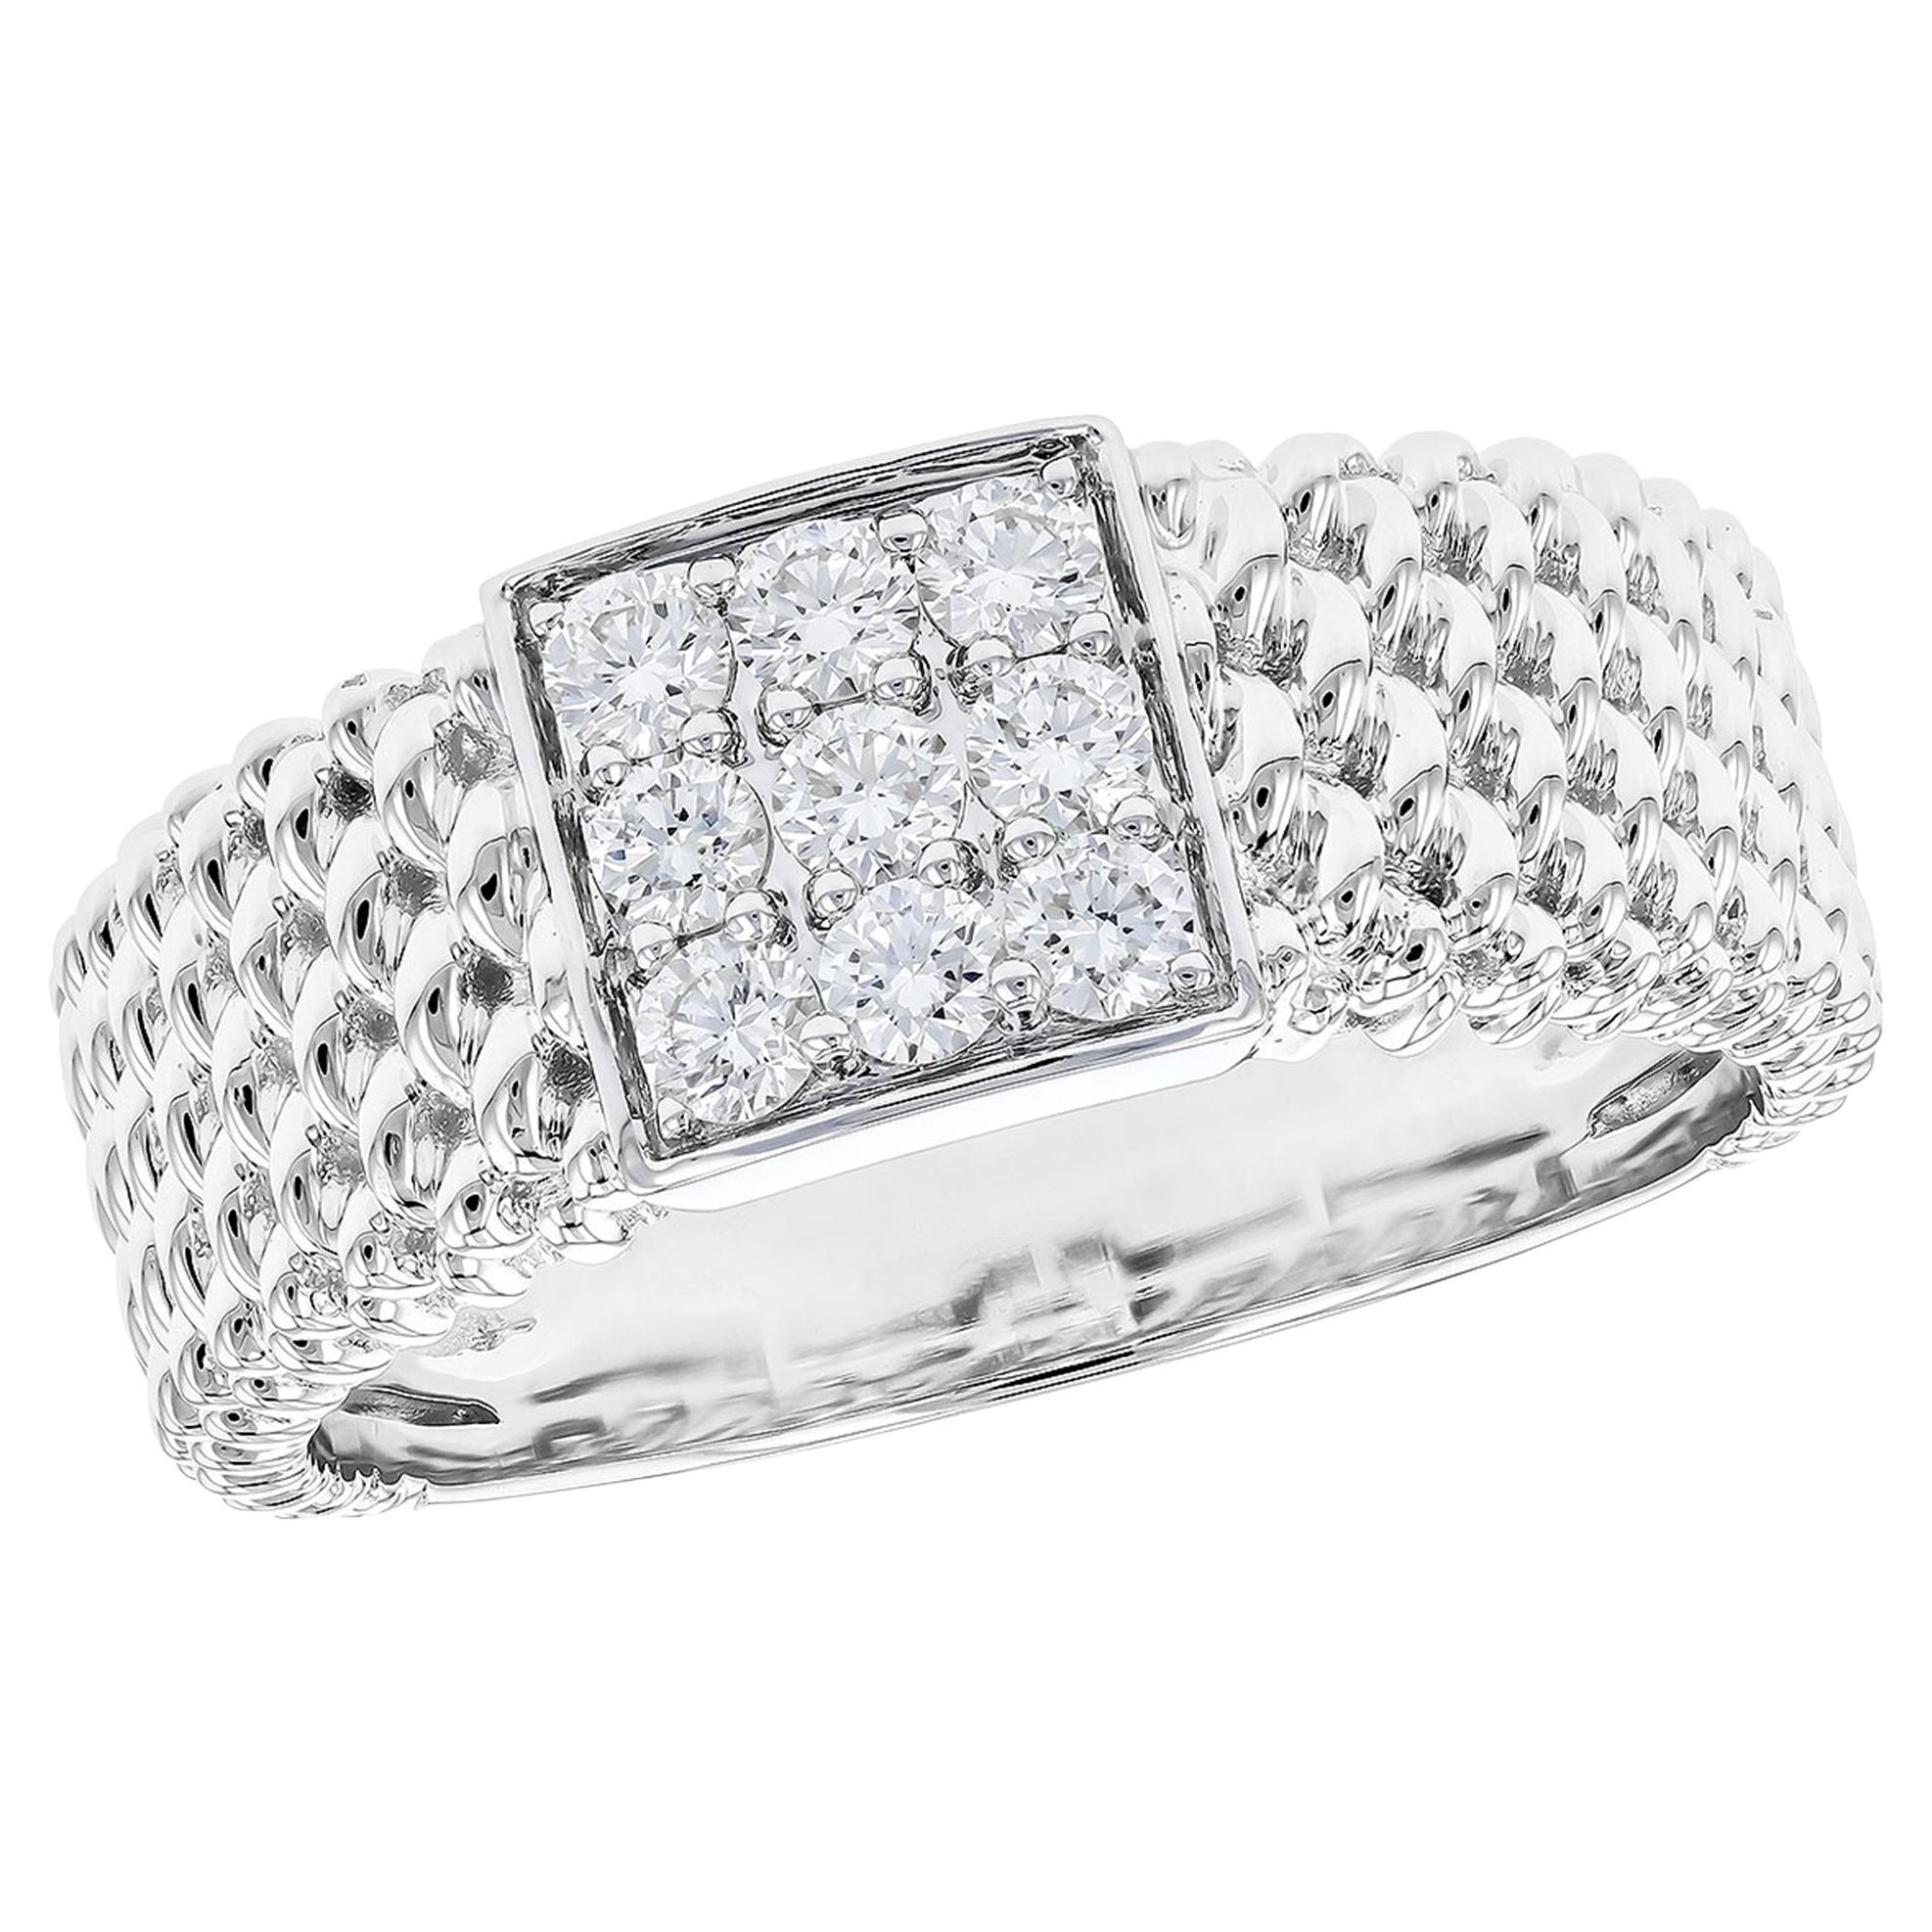 Allison Kaufman 14K White Gold Mesh Ring with Diamonds For Sale